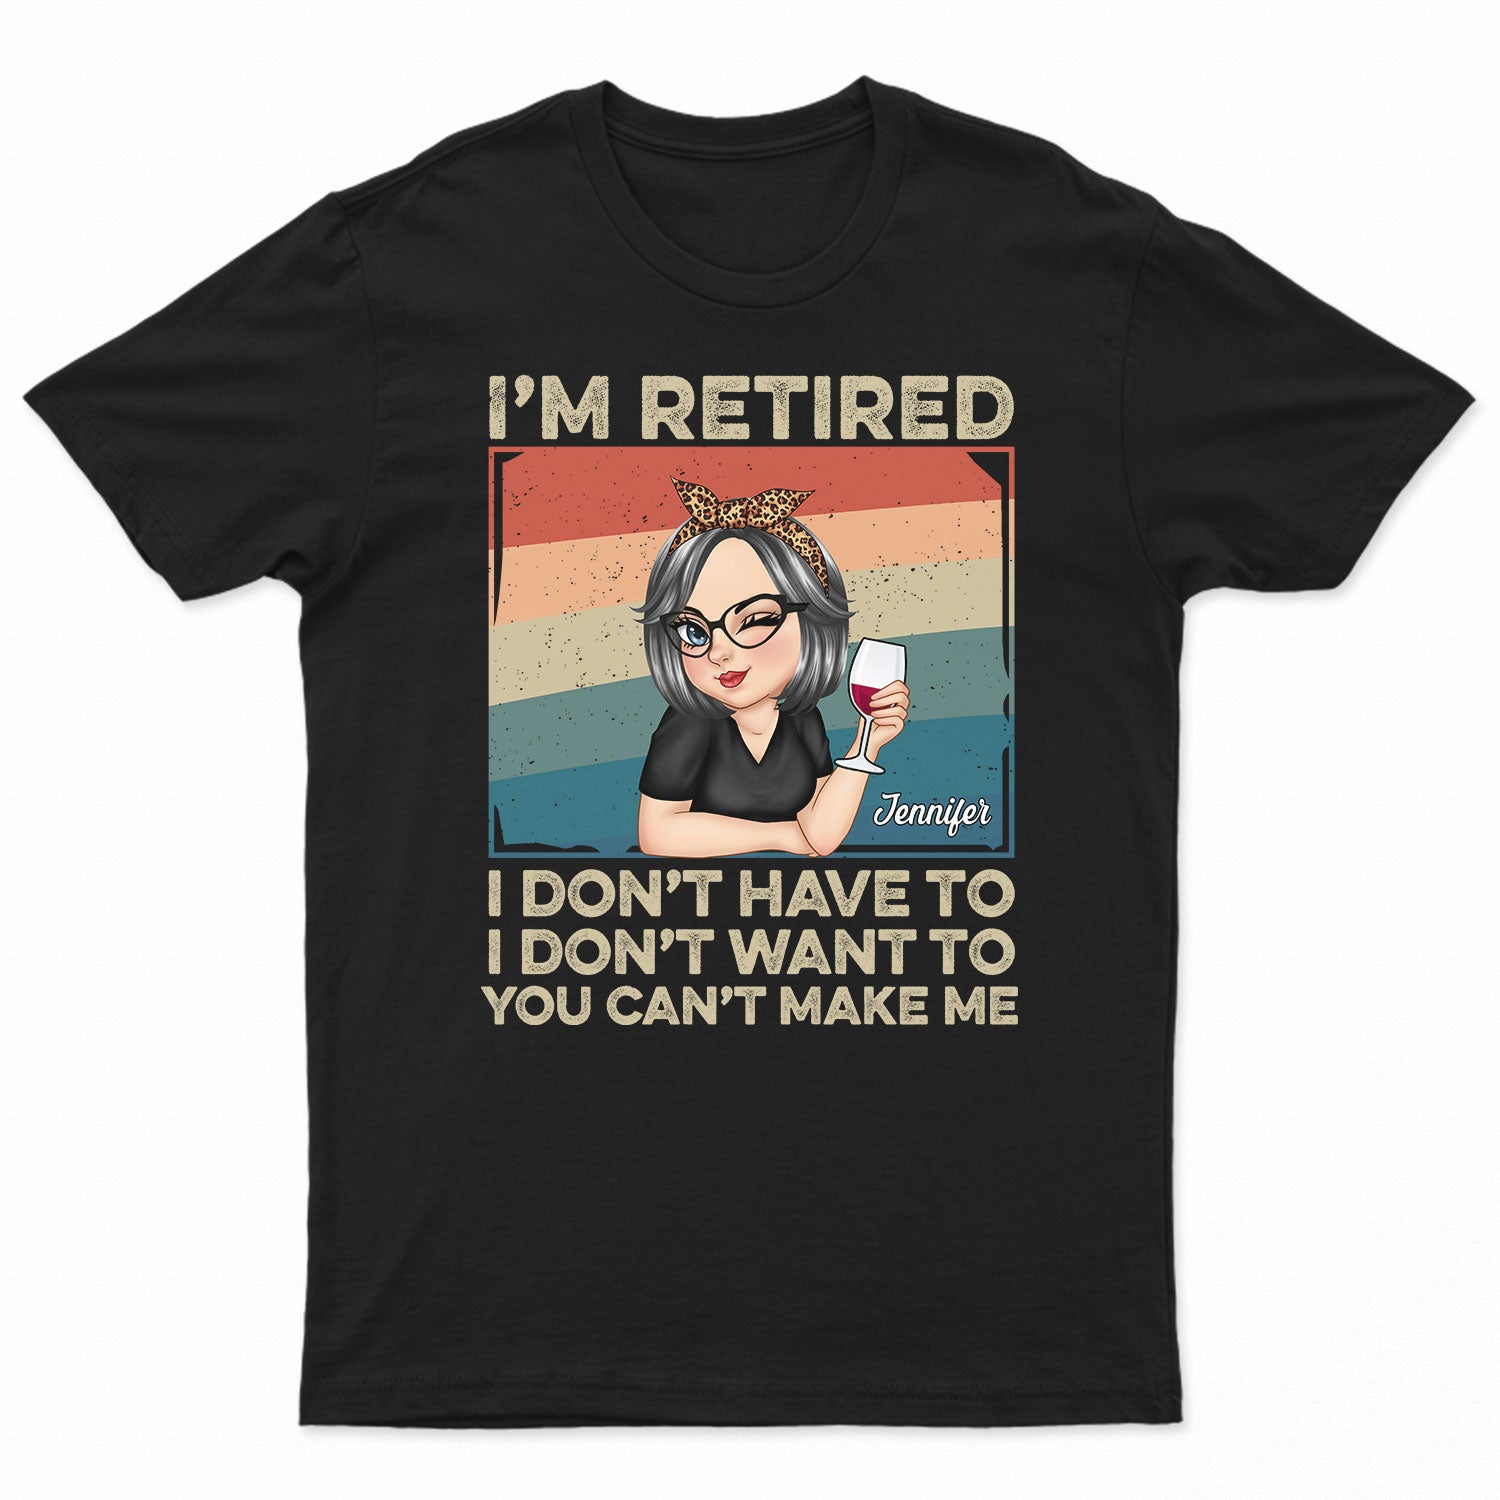 I'm Retired I Don't Want To - Retirement Gift For Women, Mom, Grandma - Personalized T Shirt